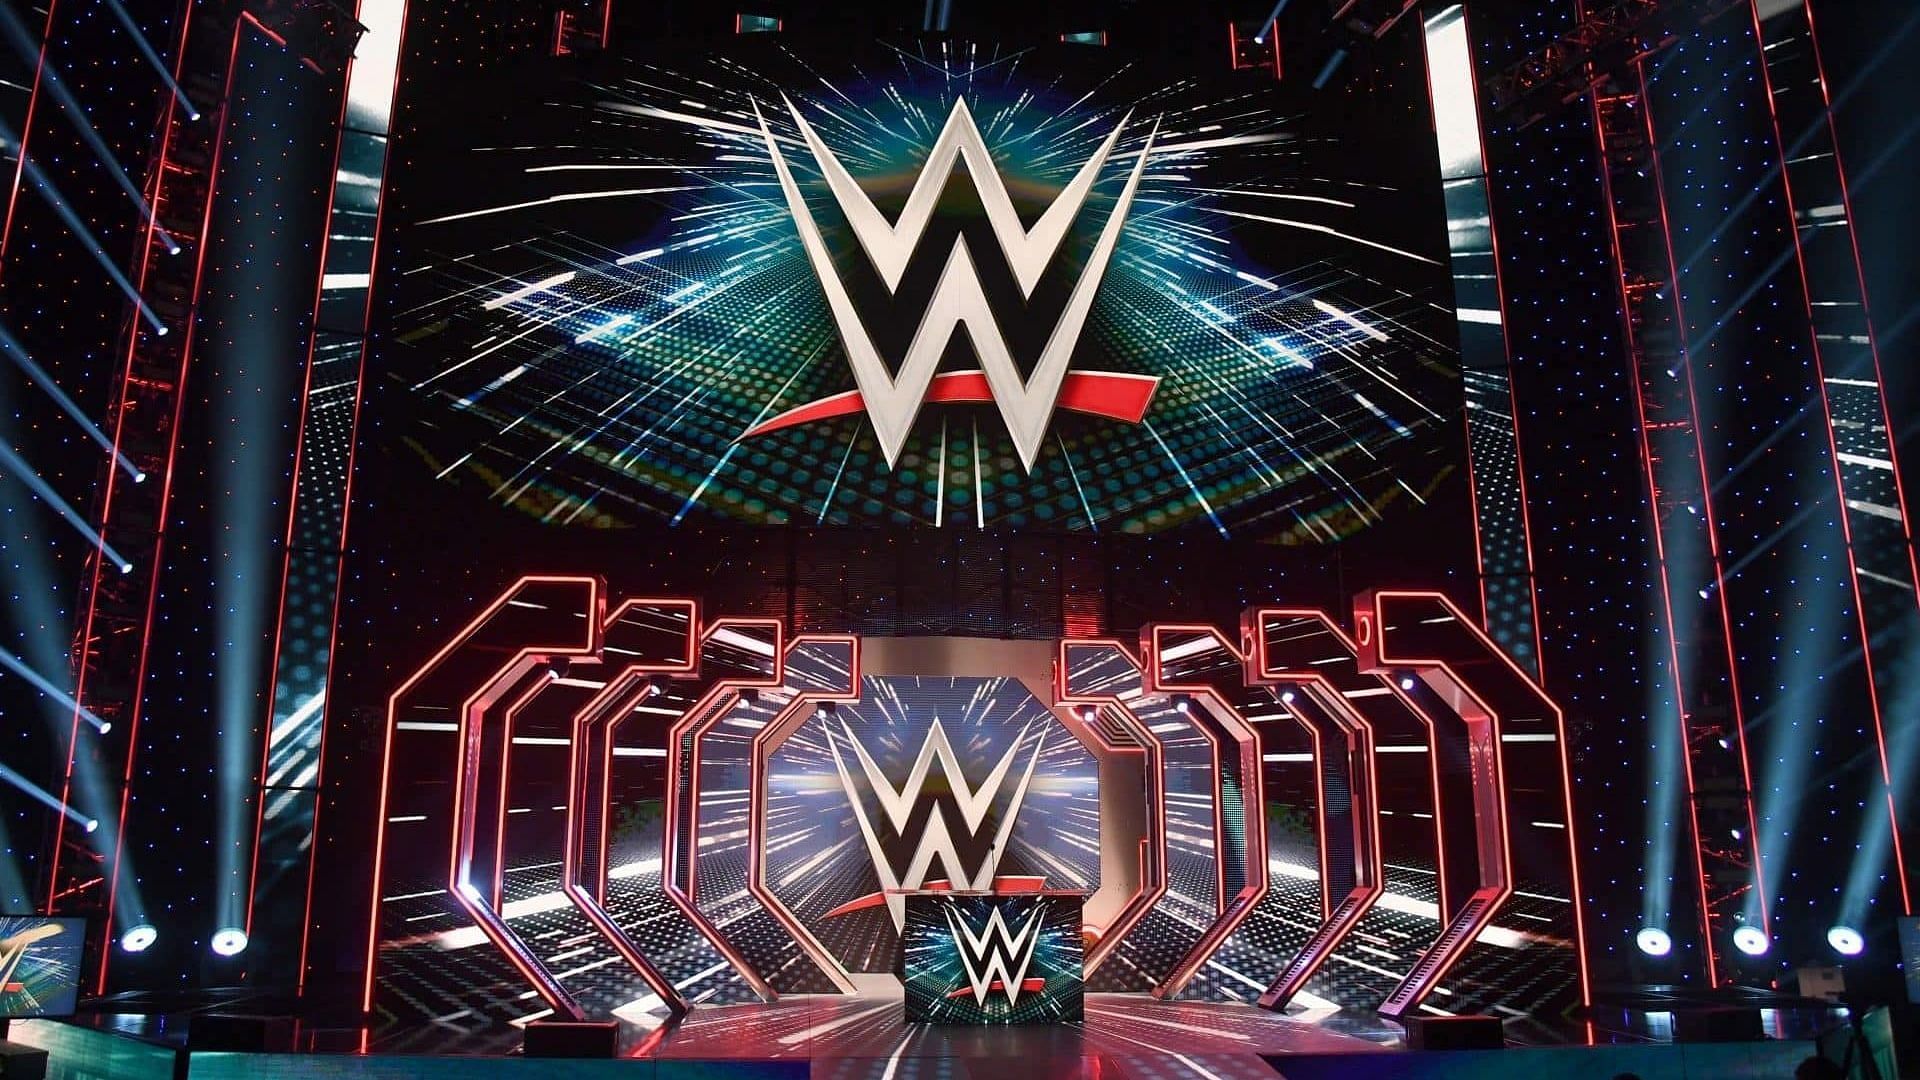 The WWE logos on display with the stage/set inside an arena